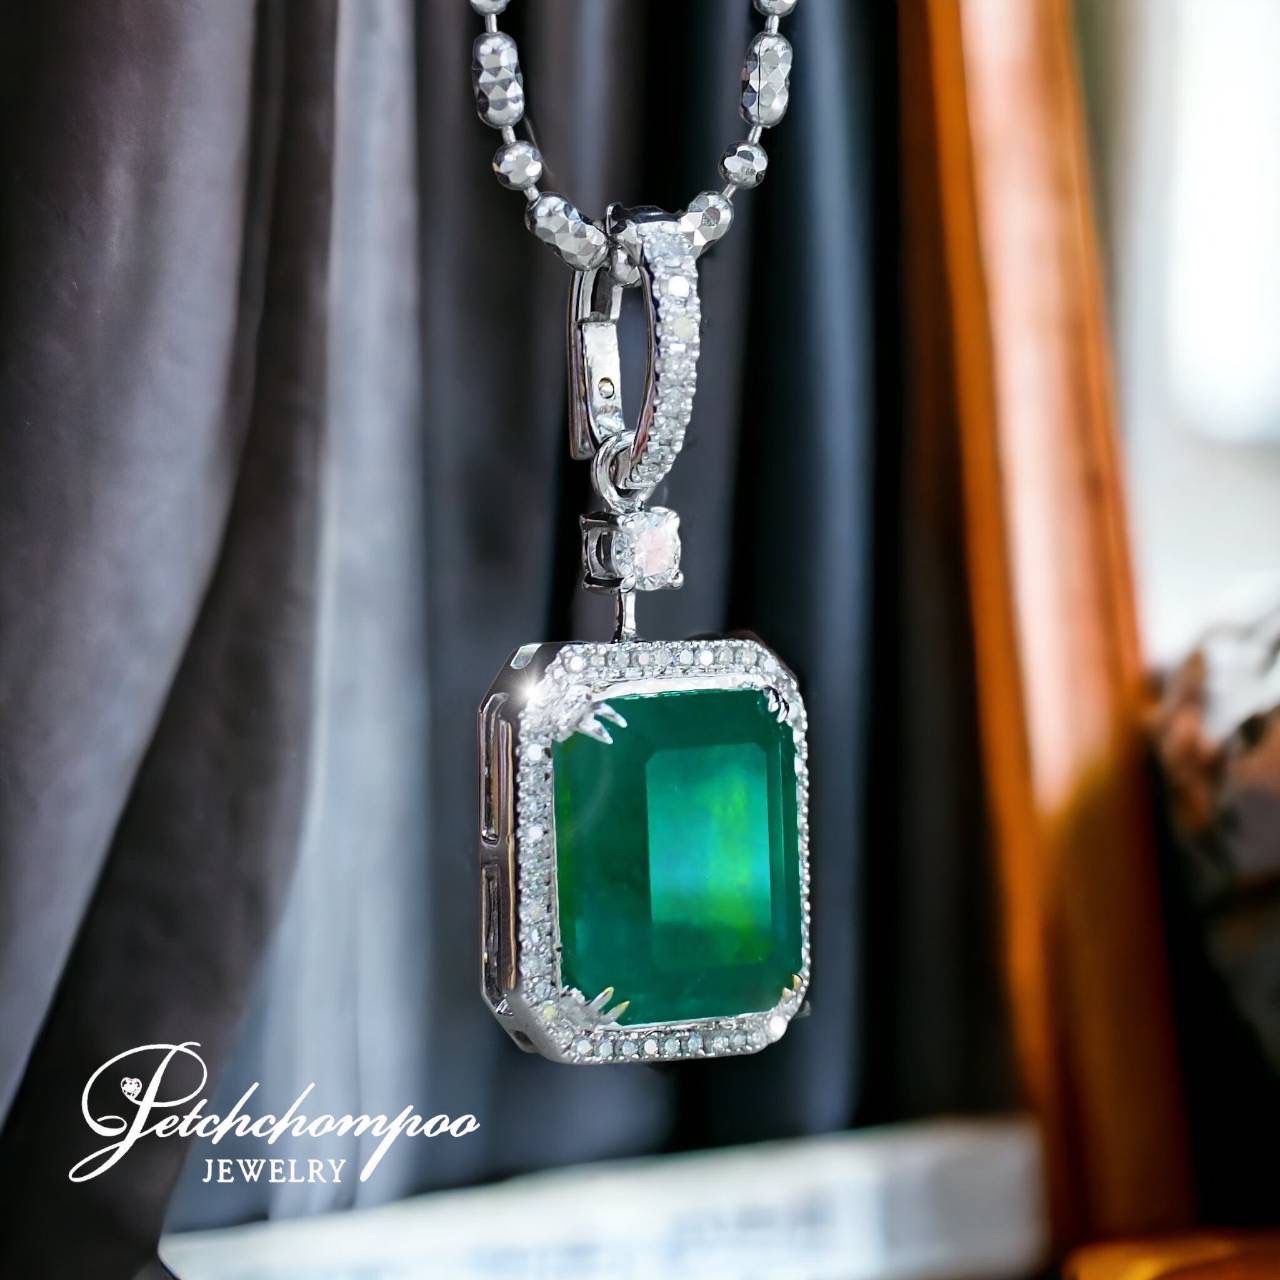 [27021] Necklace with emerald pendant, 8.06 carats of Colombia, set with IGL certificated  390,000 